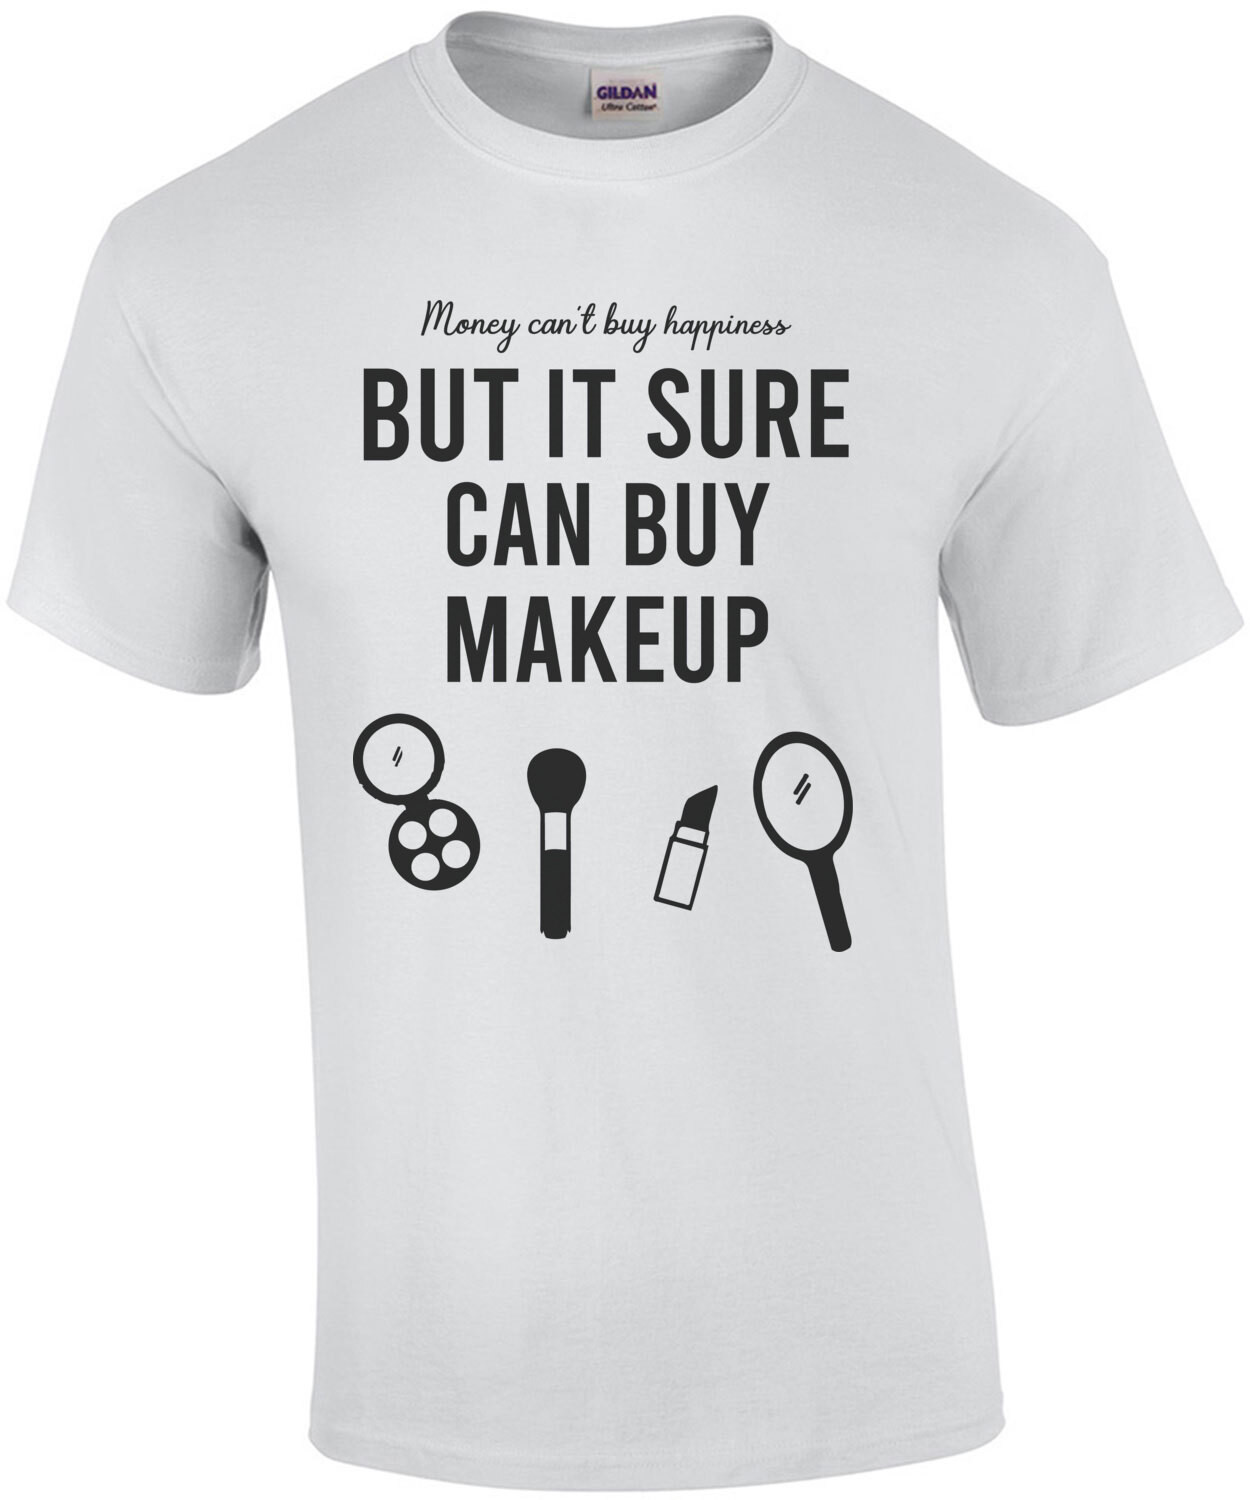 Money can't buy happiness but it sure can buy makeup - funny ladies t-shirt